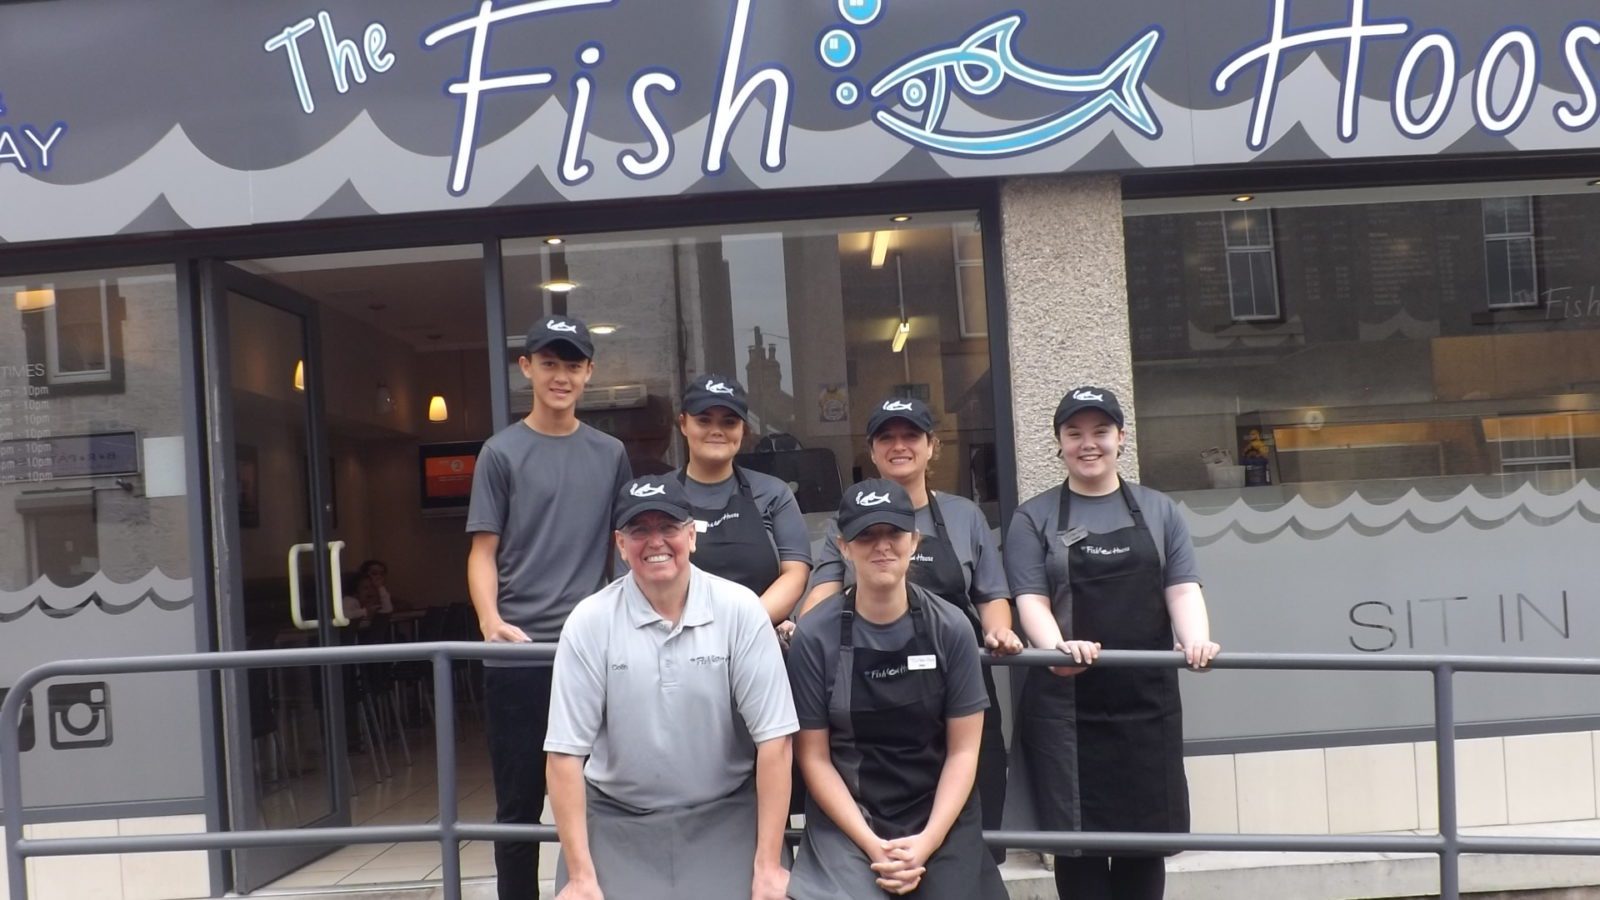 Scotland's top fish and chip shops